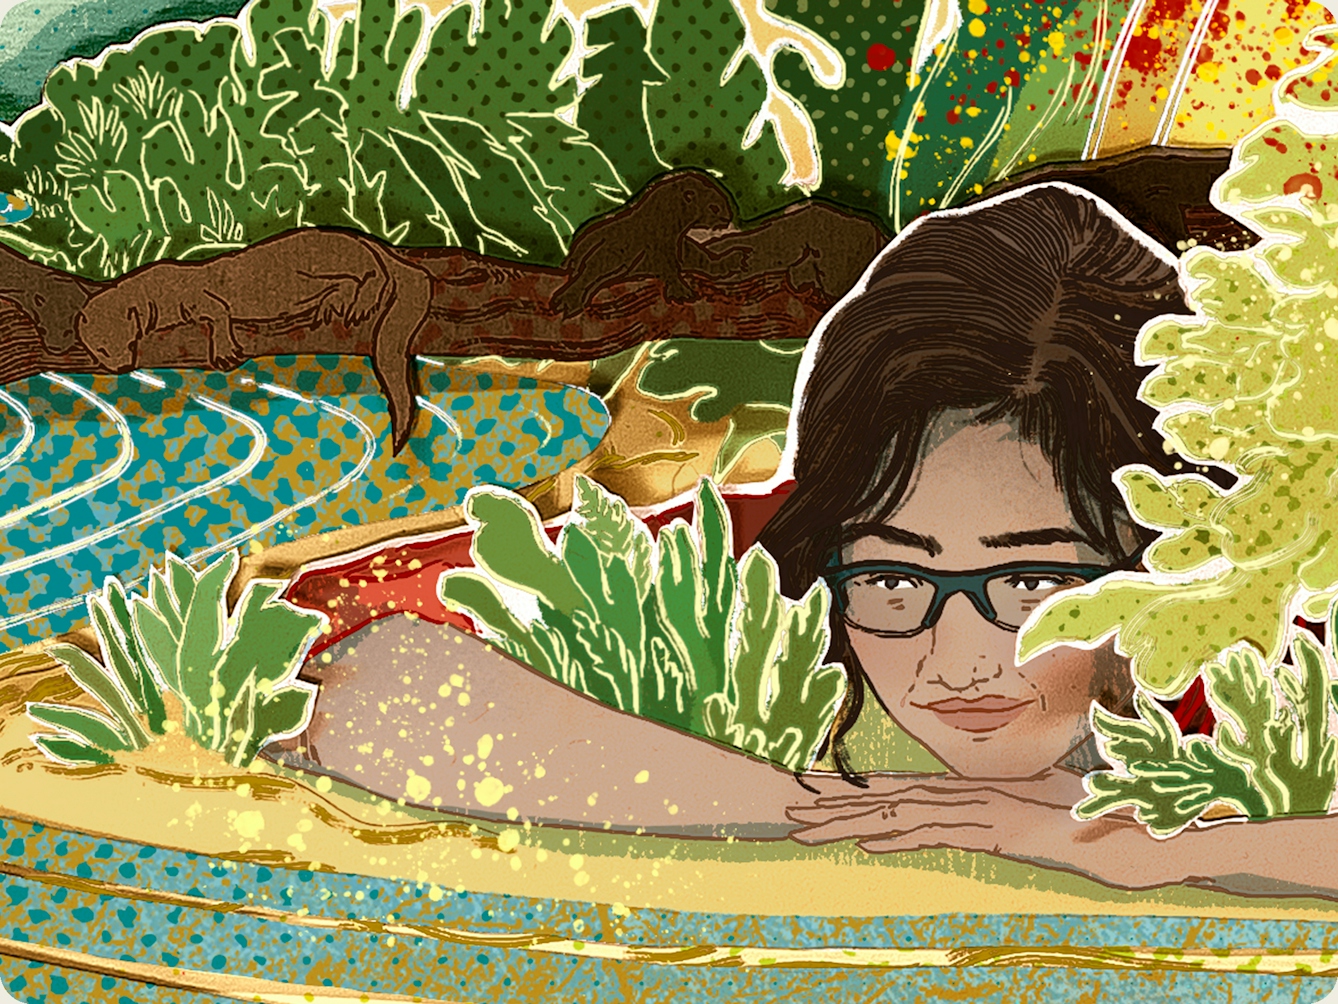 Photograph of a papercut 3D artwork. Detail from a larger artwork, showing a brunette girl wearing framed glasses, resting her head on her hands. She is surrounded by green plants and trees with red and yellow paint splatters. The girl is resting near a river bank, which is a mottled blue and yellow colour with white brush strokes showing its curvature. Four brown otters are shown resting and playing on a branch outstretched across the river. 